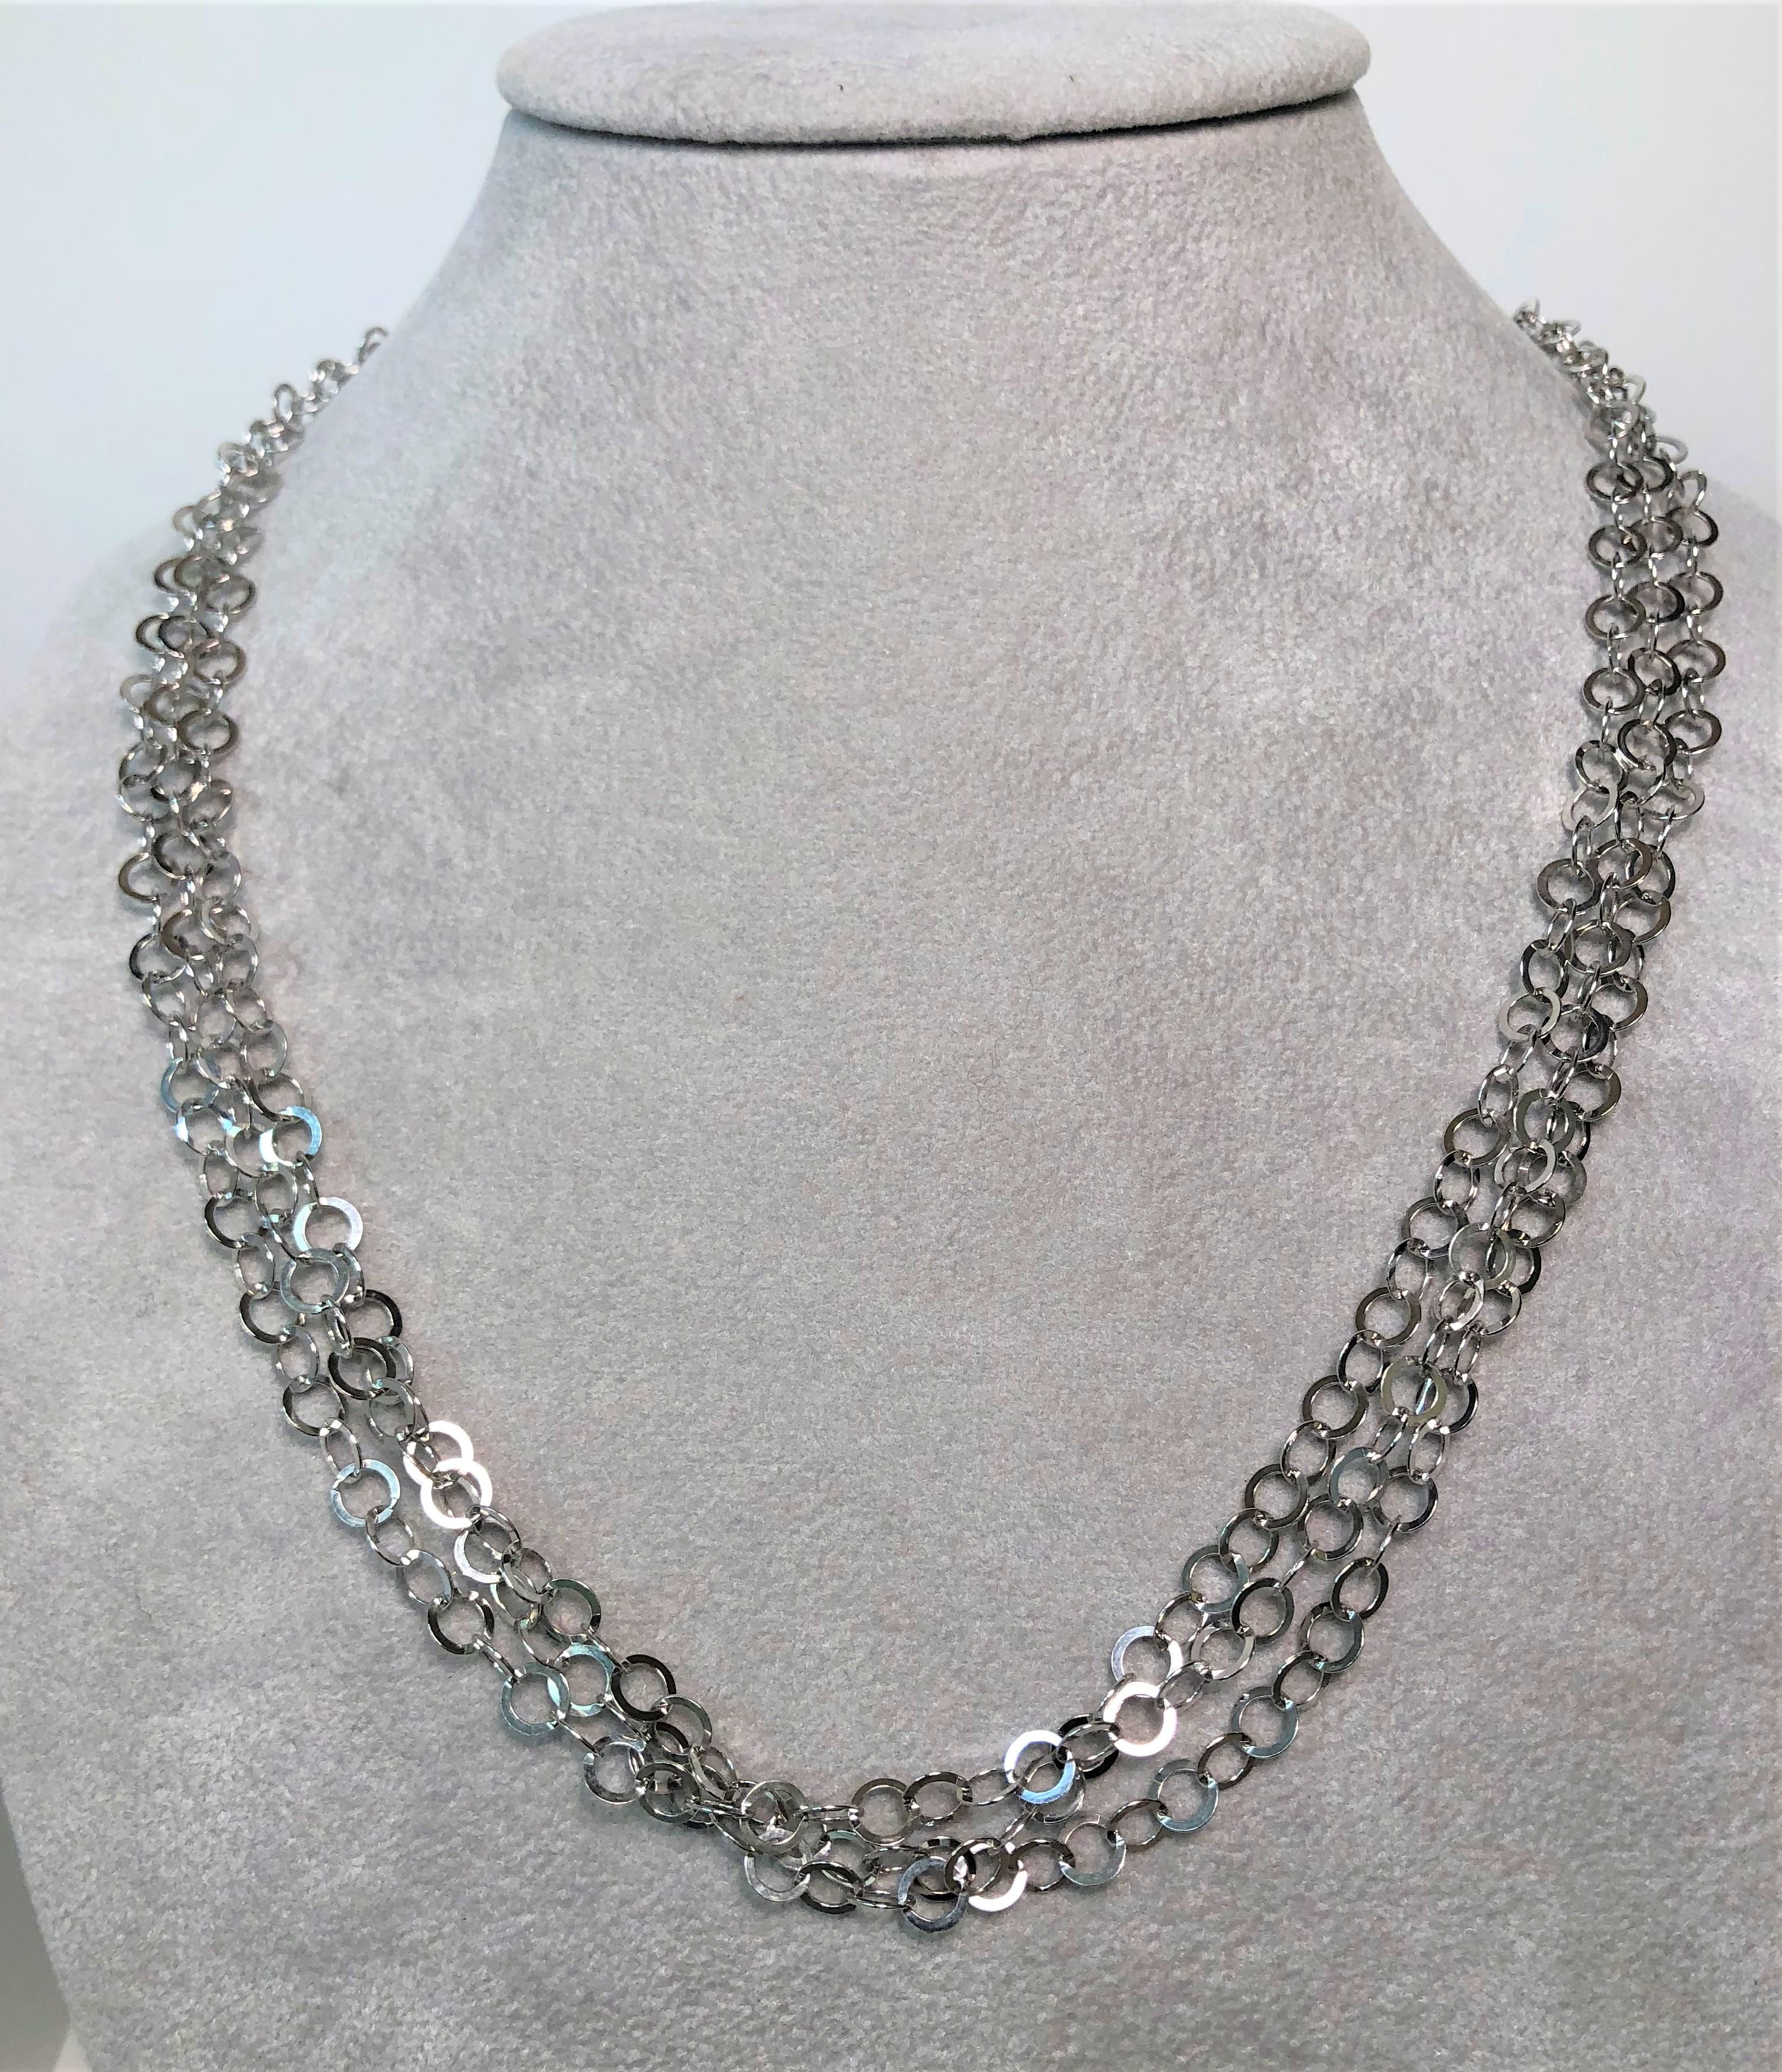 True to Frederic Duclos high quality sterling silver style, this triple strand light weight shiny necklace is a must have!
Wear dressed down or for a dressy event!  
Sterling silver three strand circle link necklace.
Lobster clasp.
Stamped 